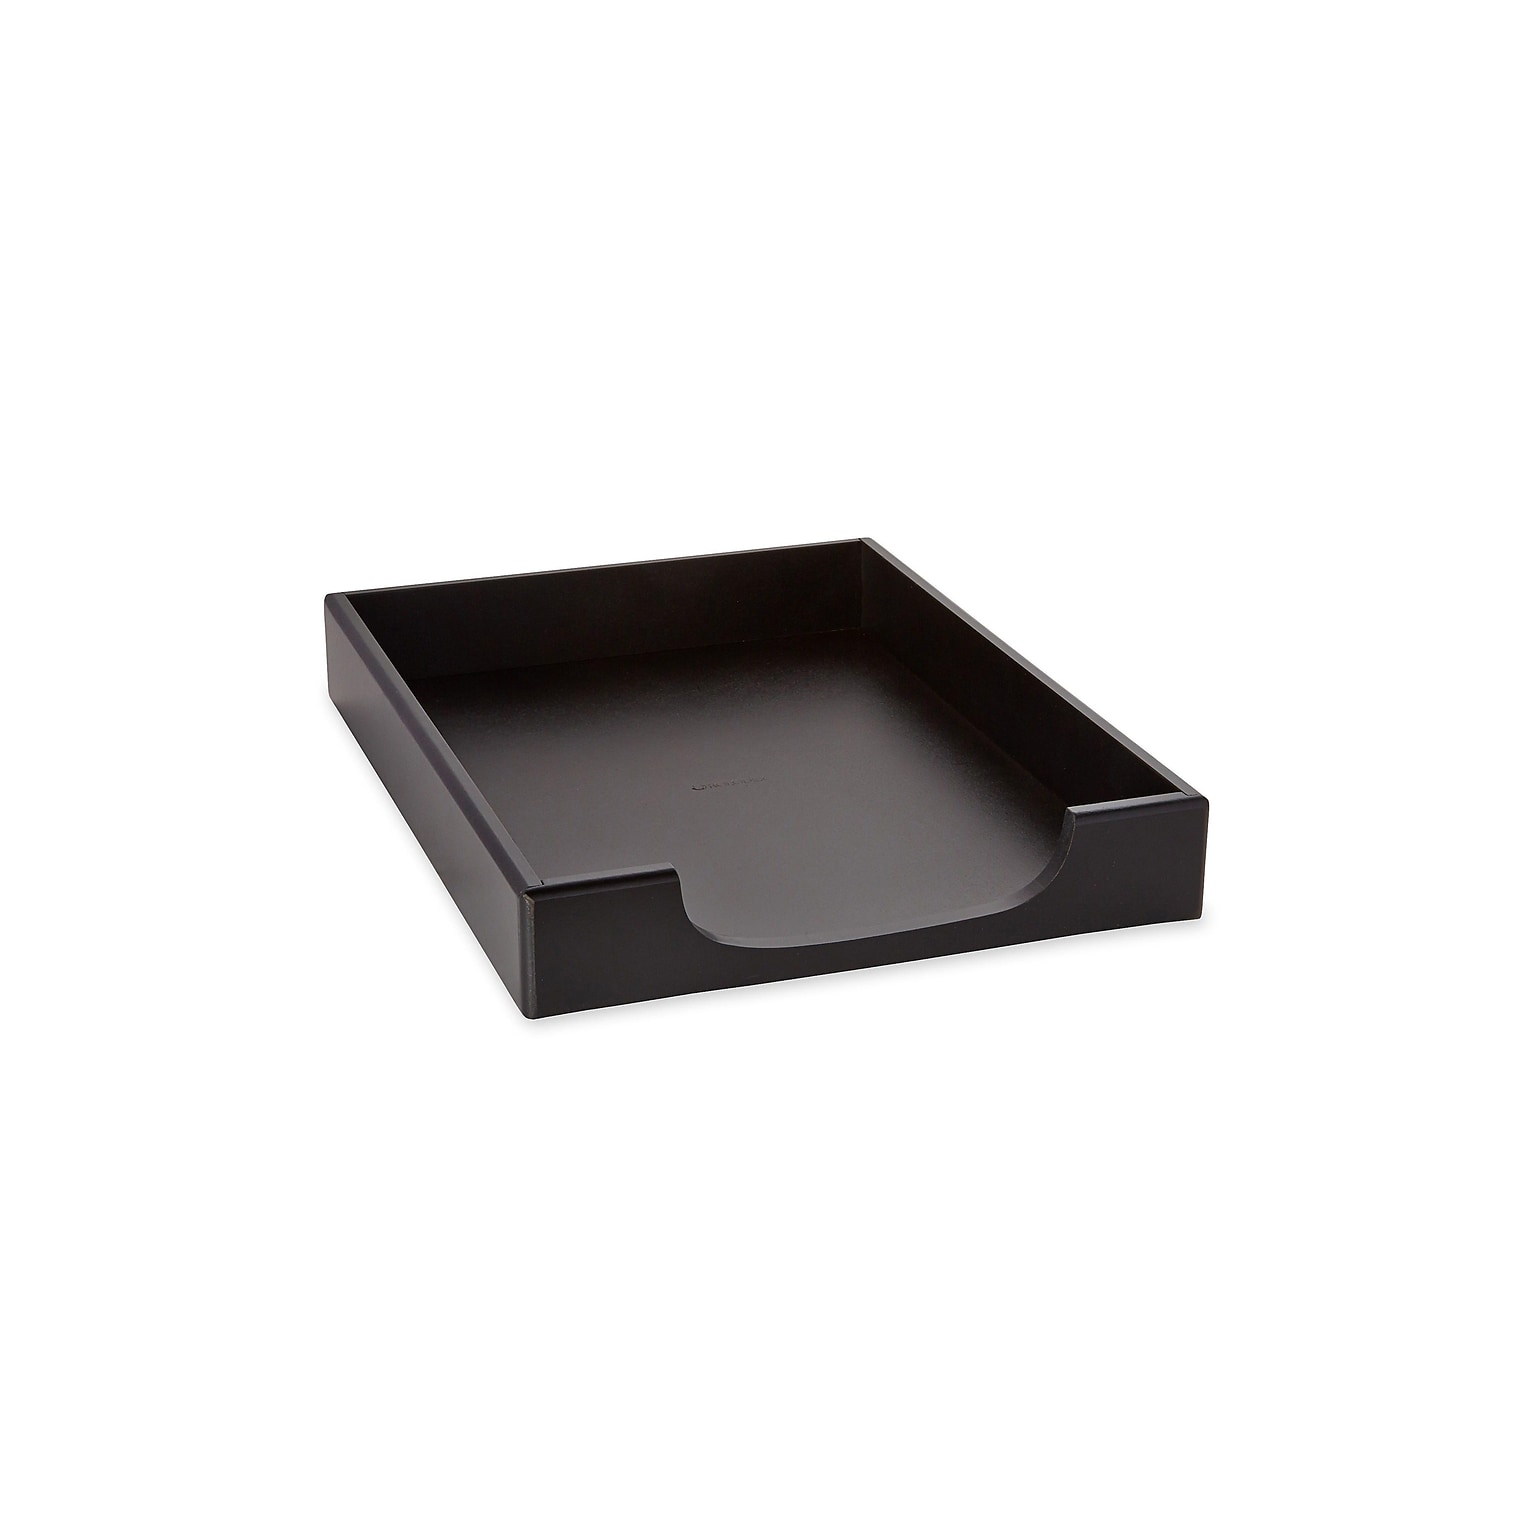 Rolodex Wood Tones Front Loading Letter Tray, Black (62523)